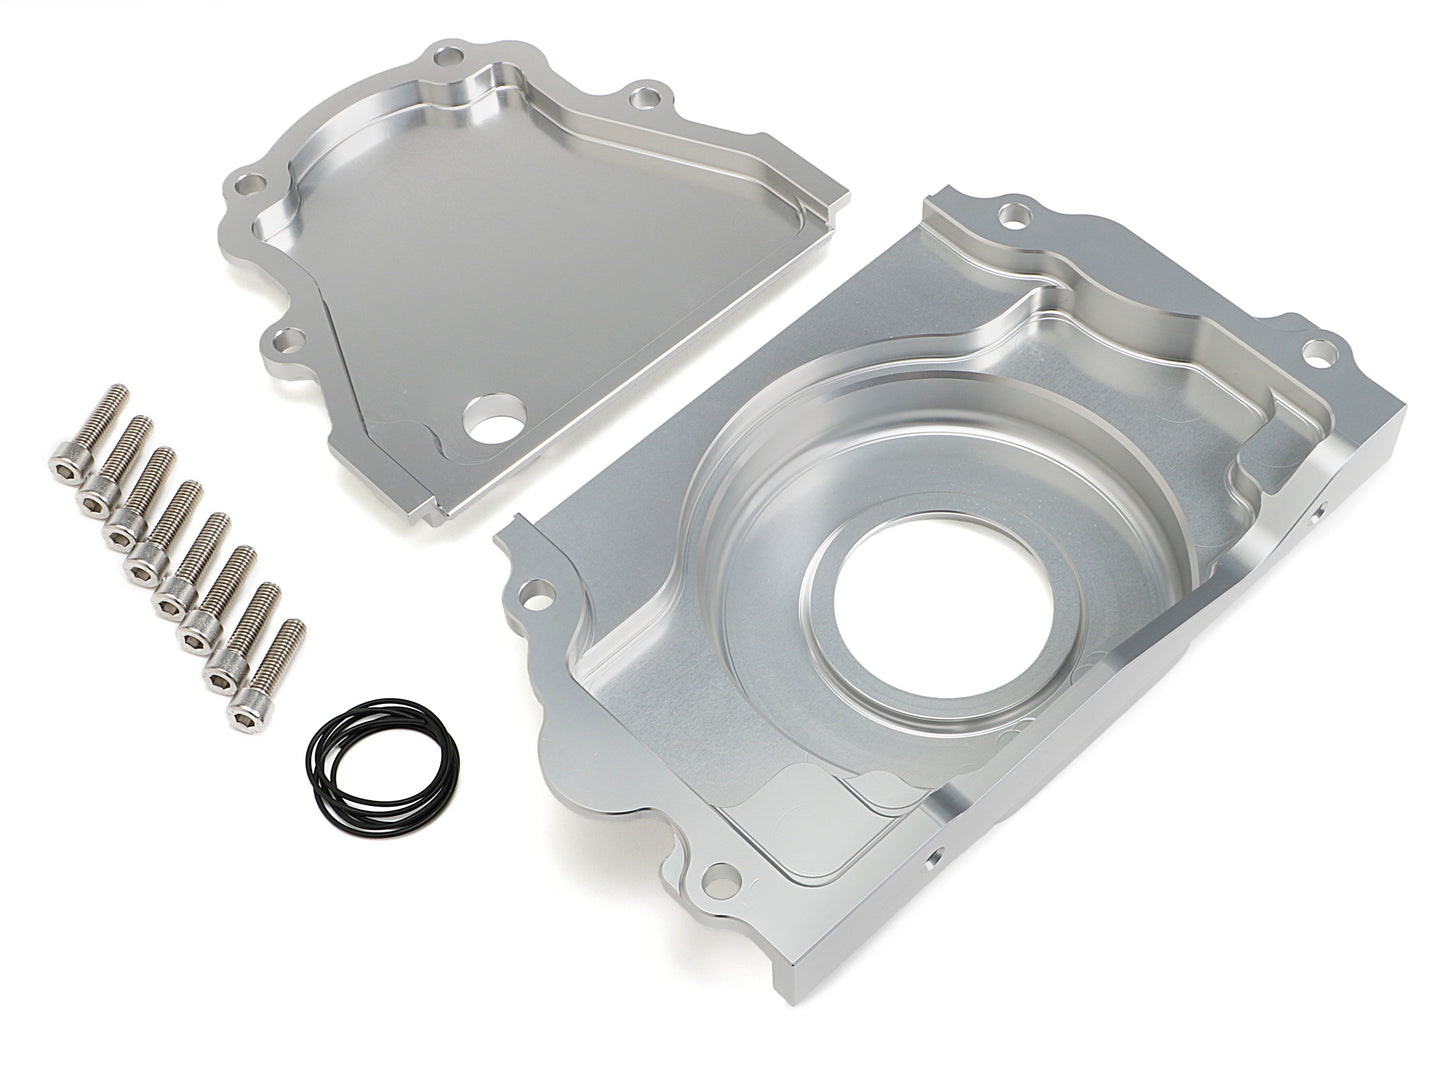 HAMBURGER'S PERFORMANCE PRODUCTS TWO-PIECE TIMING COVER; GEN IV LS ENGINES; CAM SENSOR IN COVER- BILLET ALUMINUM WITH CLEAR ANODIZED FINISH 1105